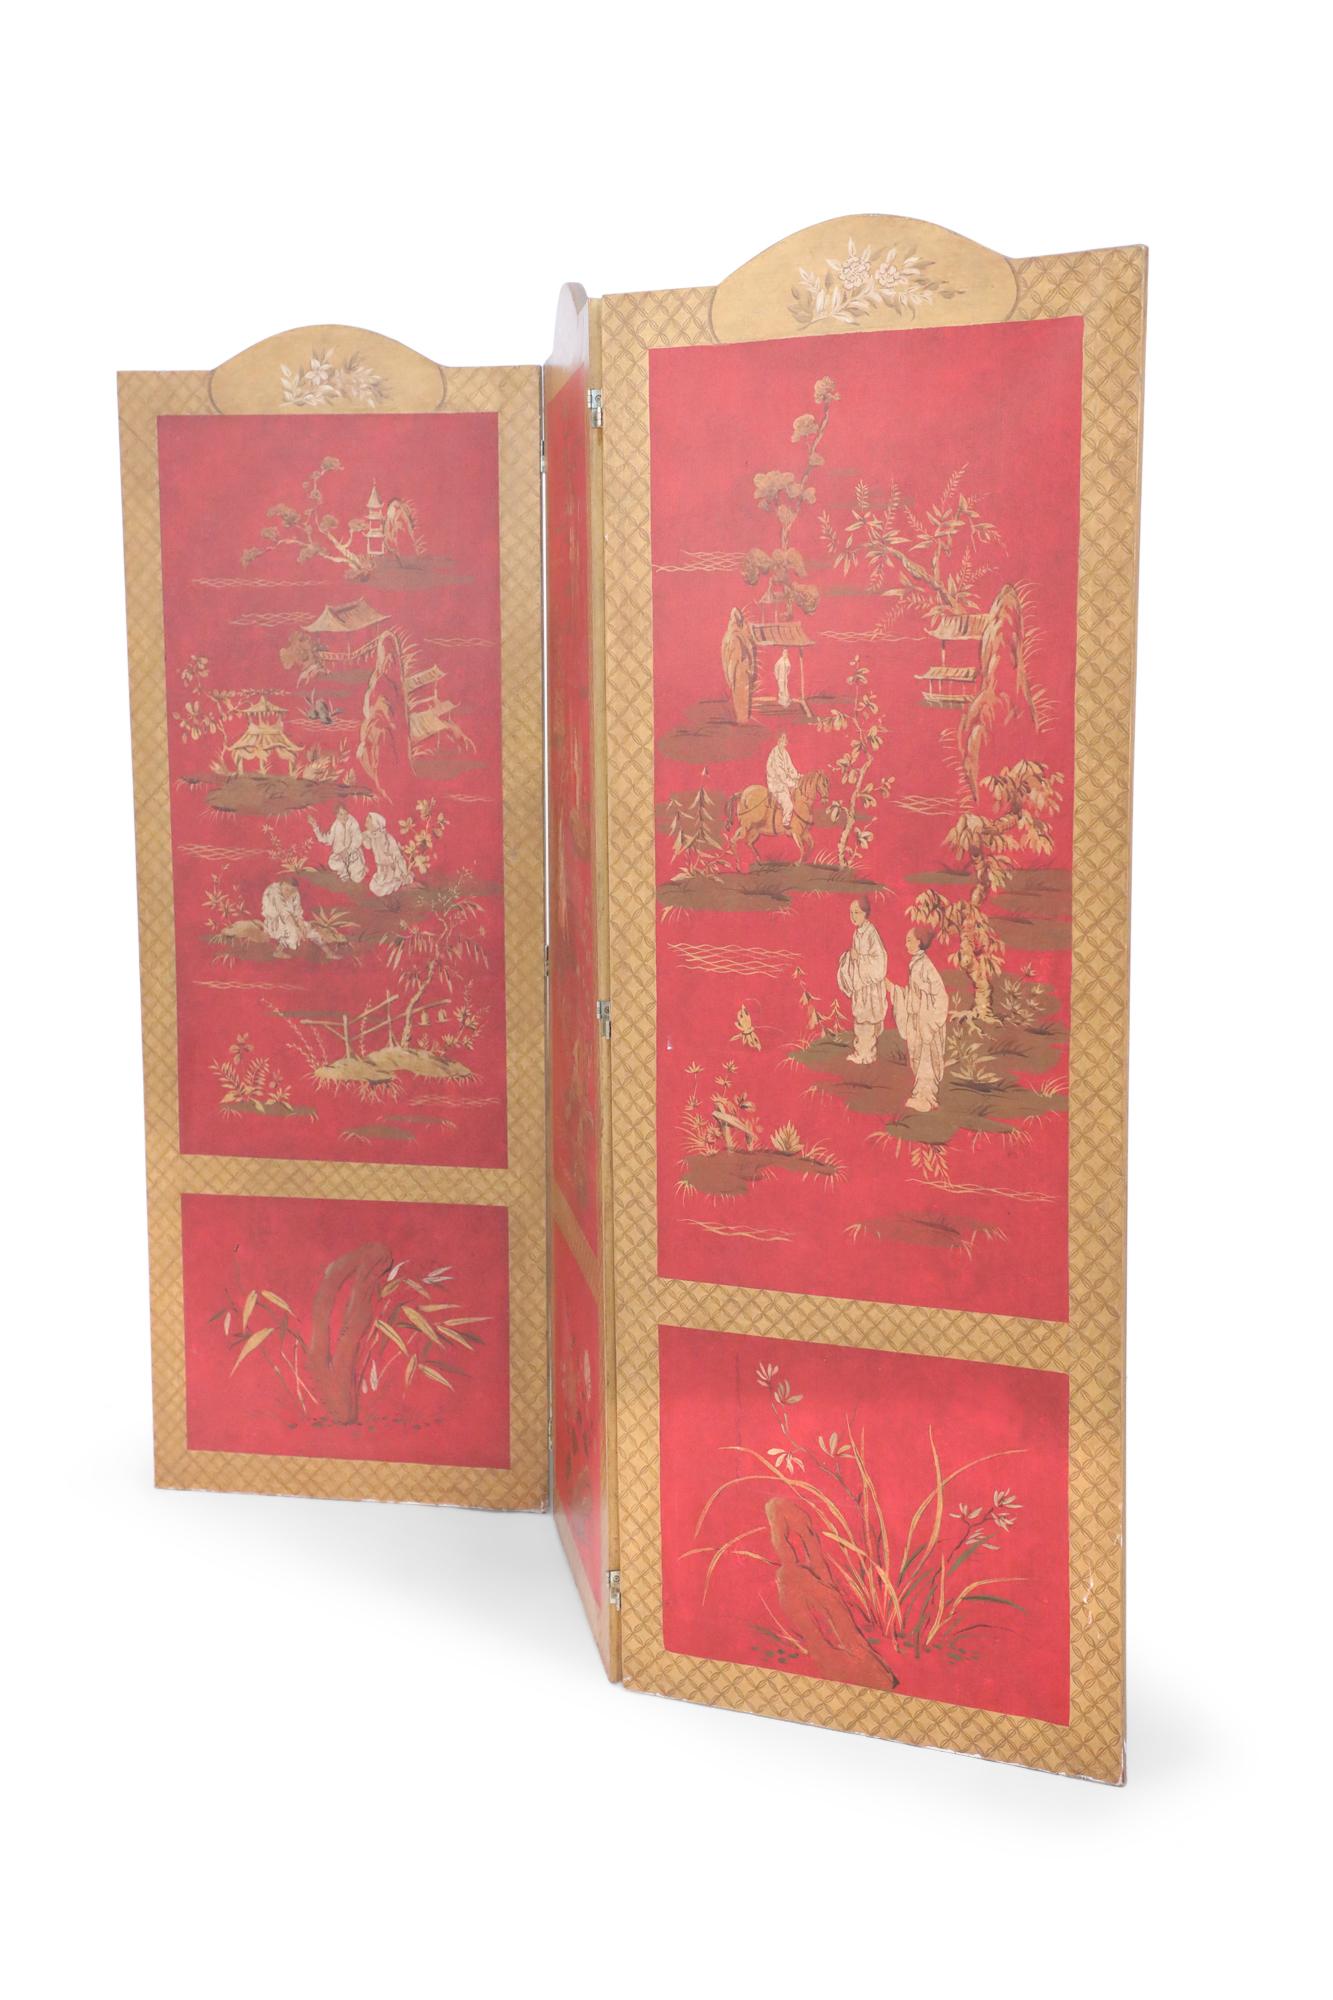 Red folding screen comprised of three panels framed in gold lattice patterns, topped with oval medallions featuring bouquets, and painted with traditional Chinoiserie designs of pagodas, nature and figures in pastoral settings.